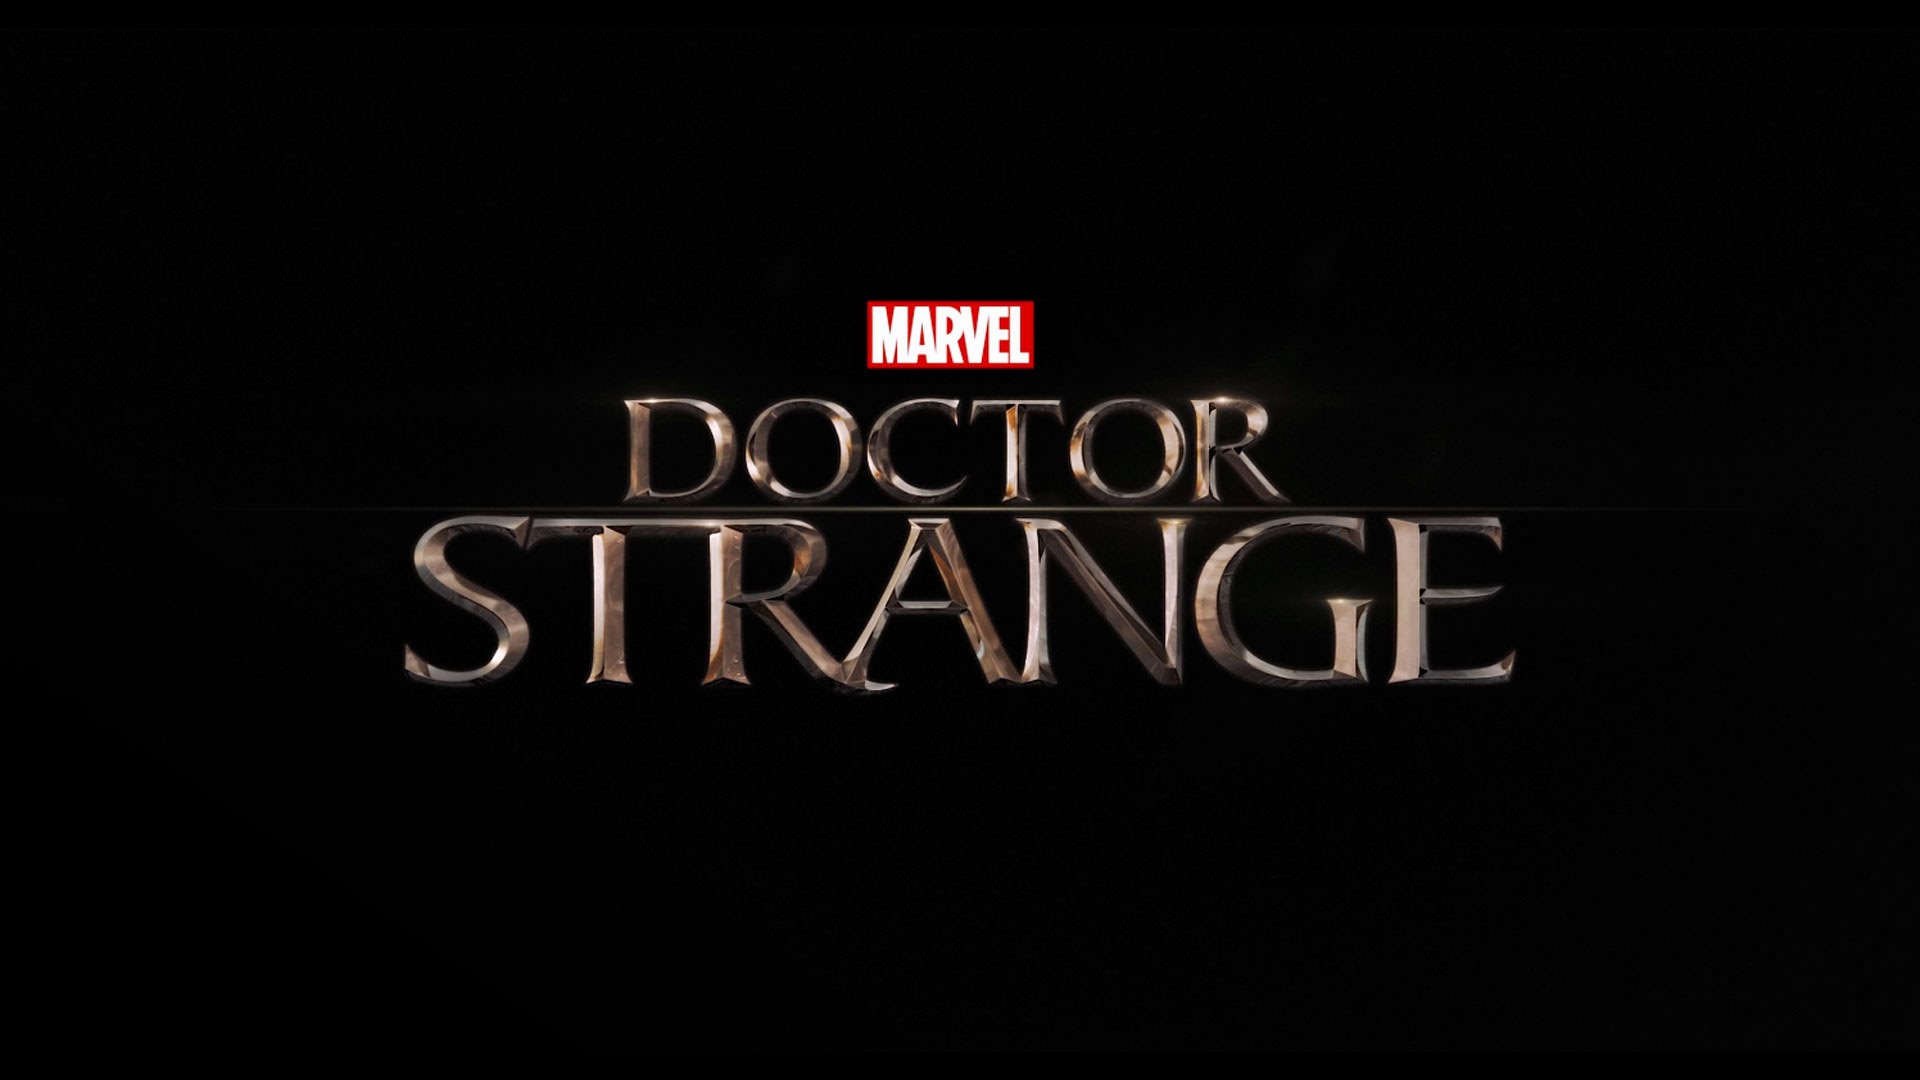 See how Doctor Strange will show off weird new dimensions